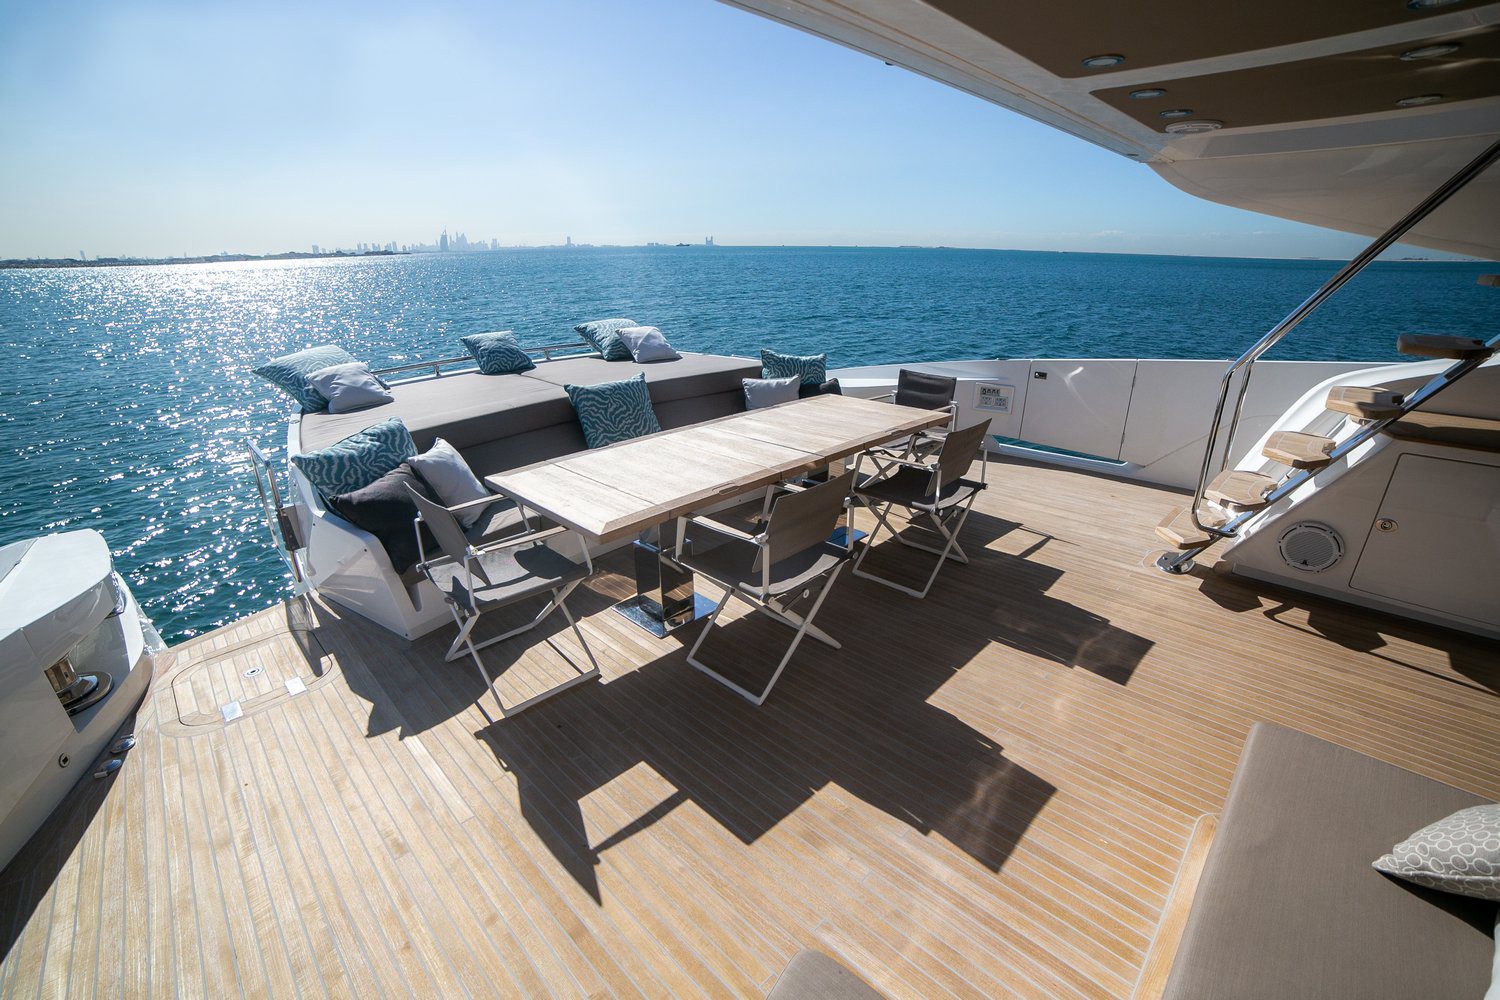 Dolce Vita 105 ft. yacht with best price in Dubai